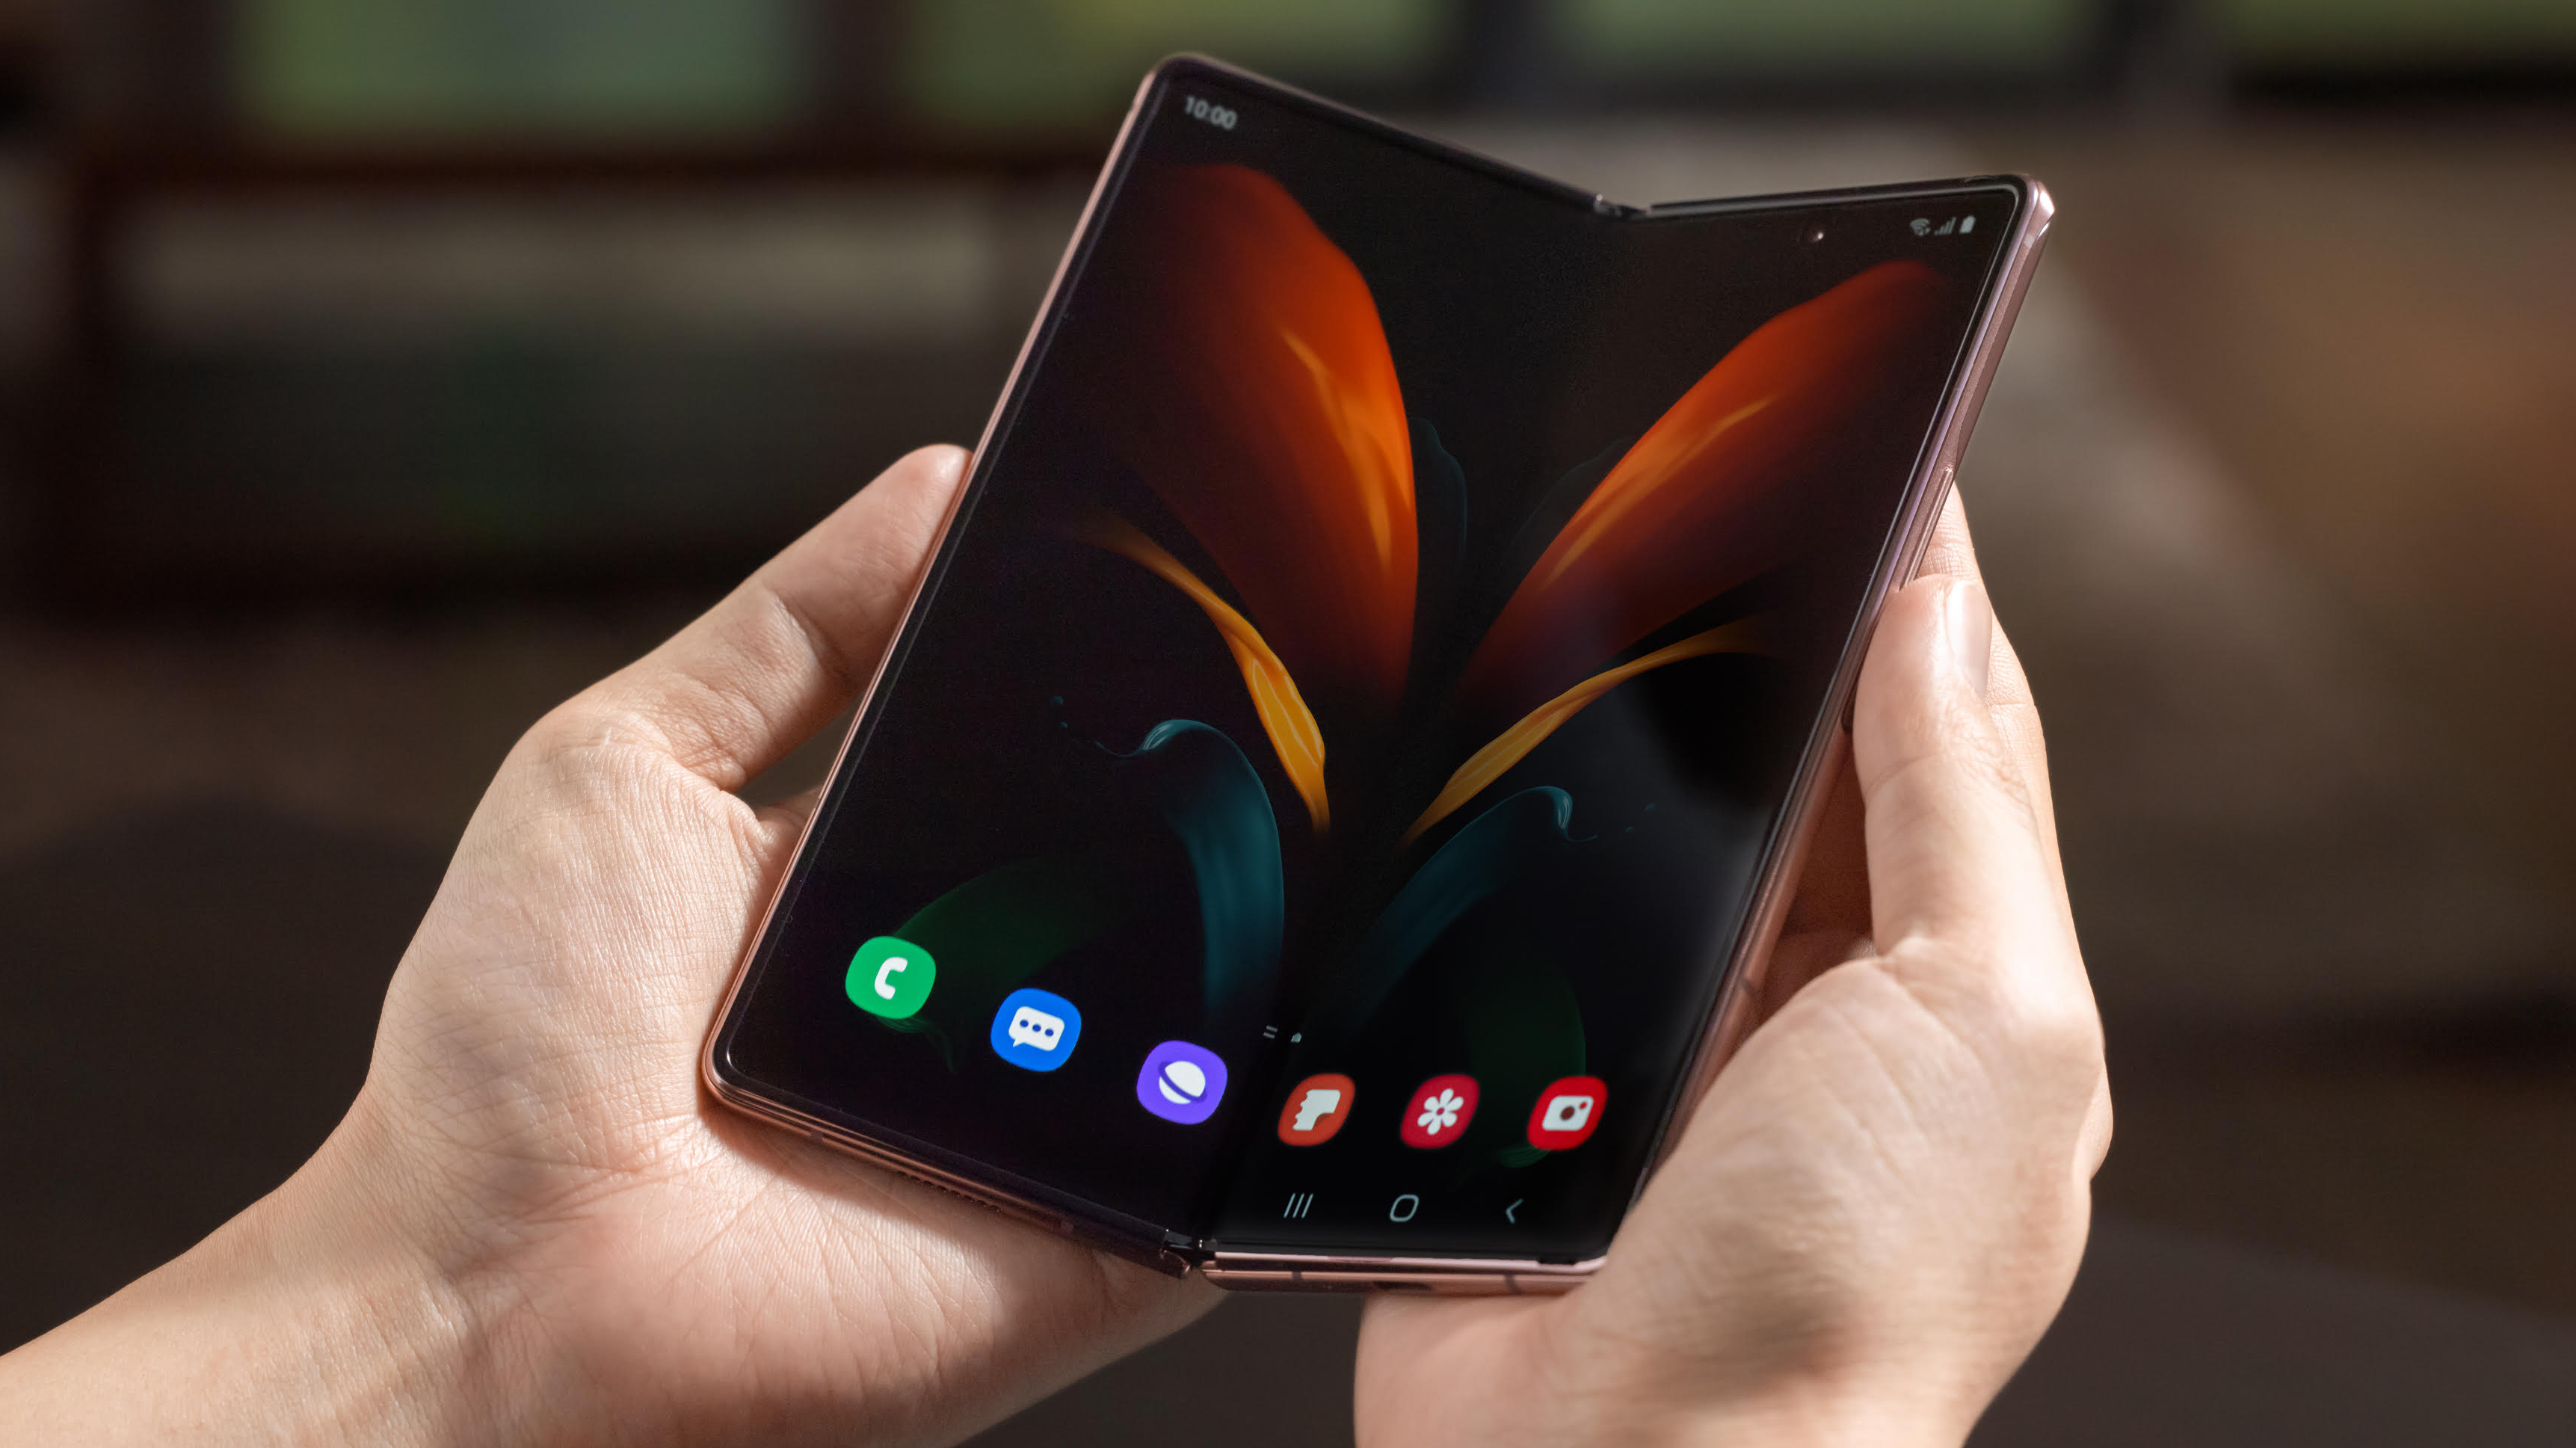 Samsung Galaxy Z Fold 2 Review: A Glimpse Into Our Ultra Mobile